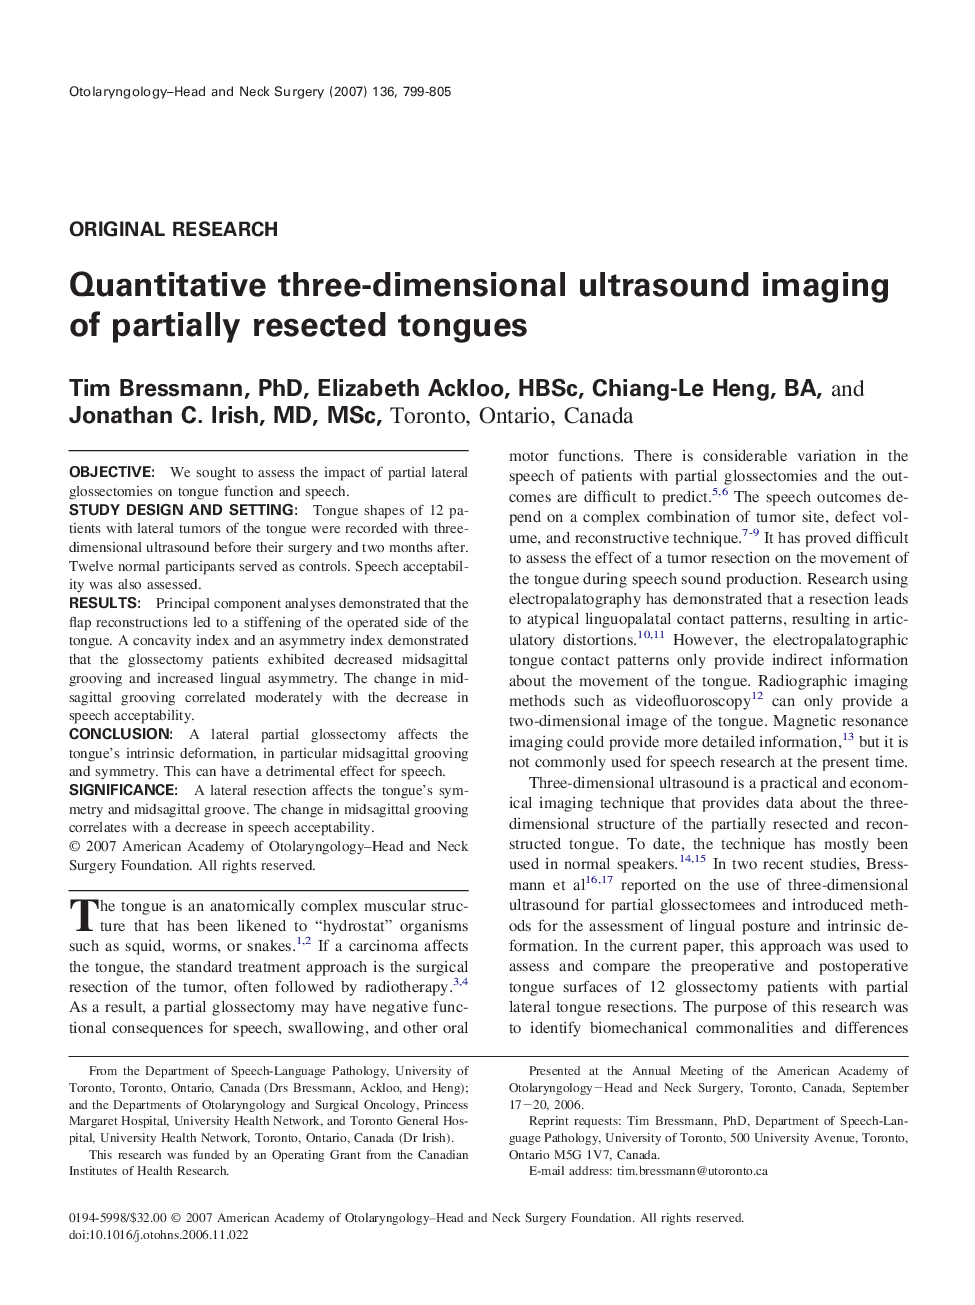 Quantitative three-dimensional ultrasound imaging of partially resected tongues